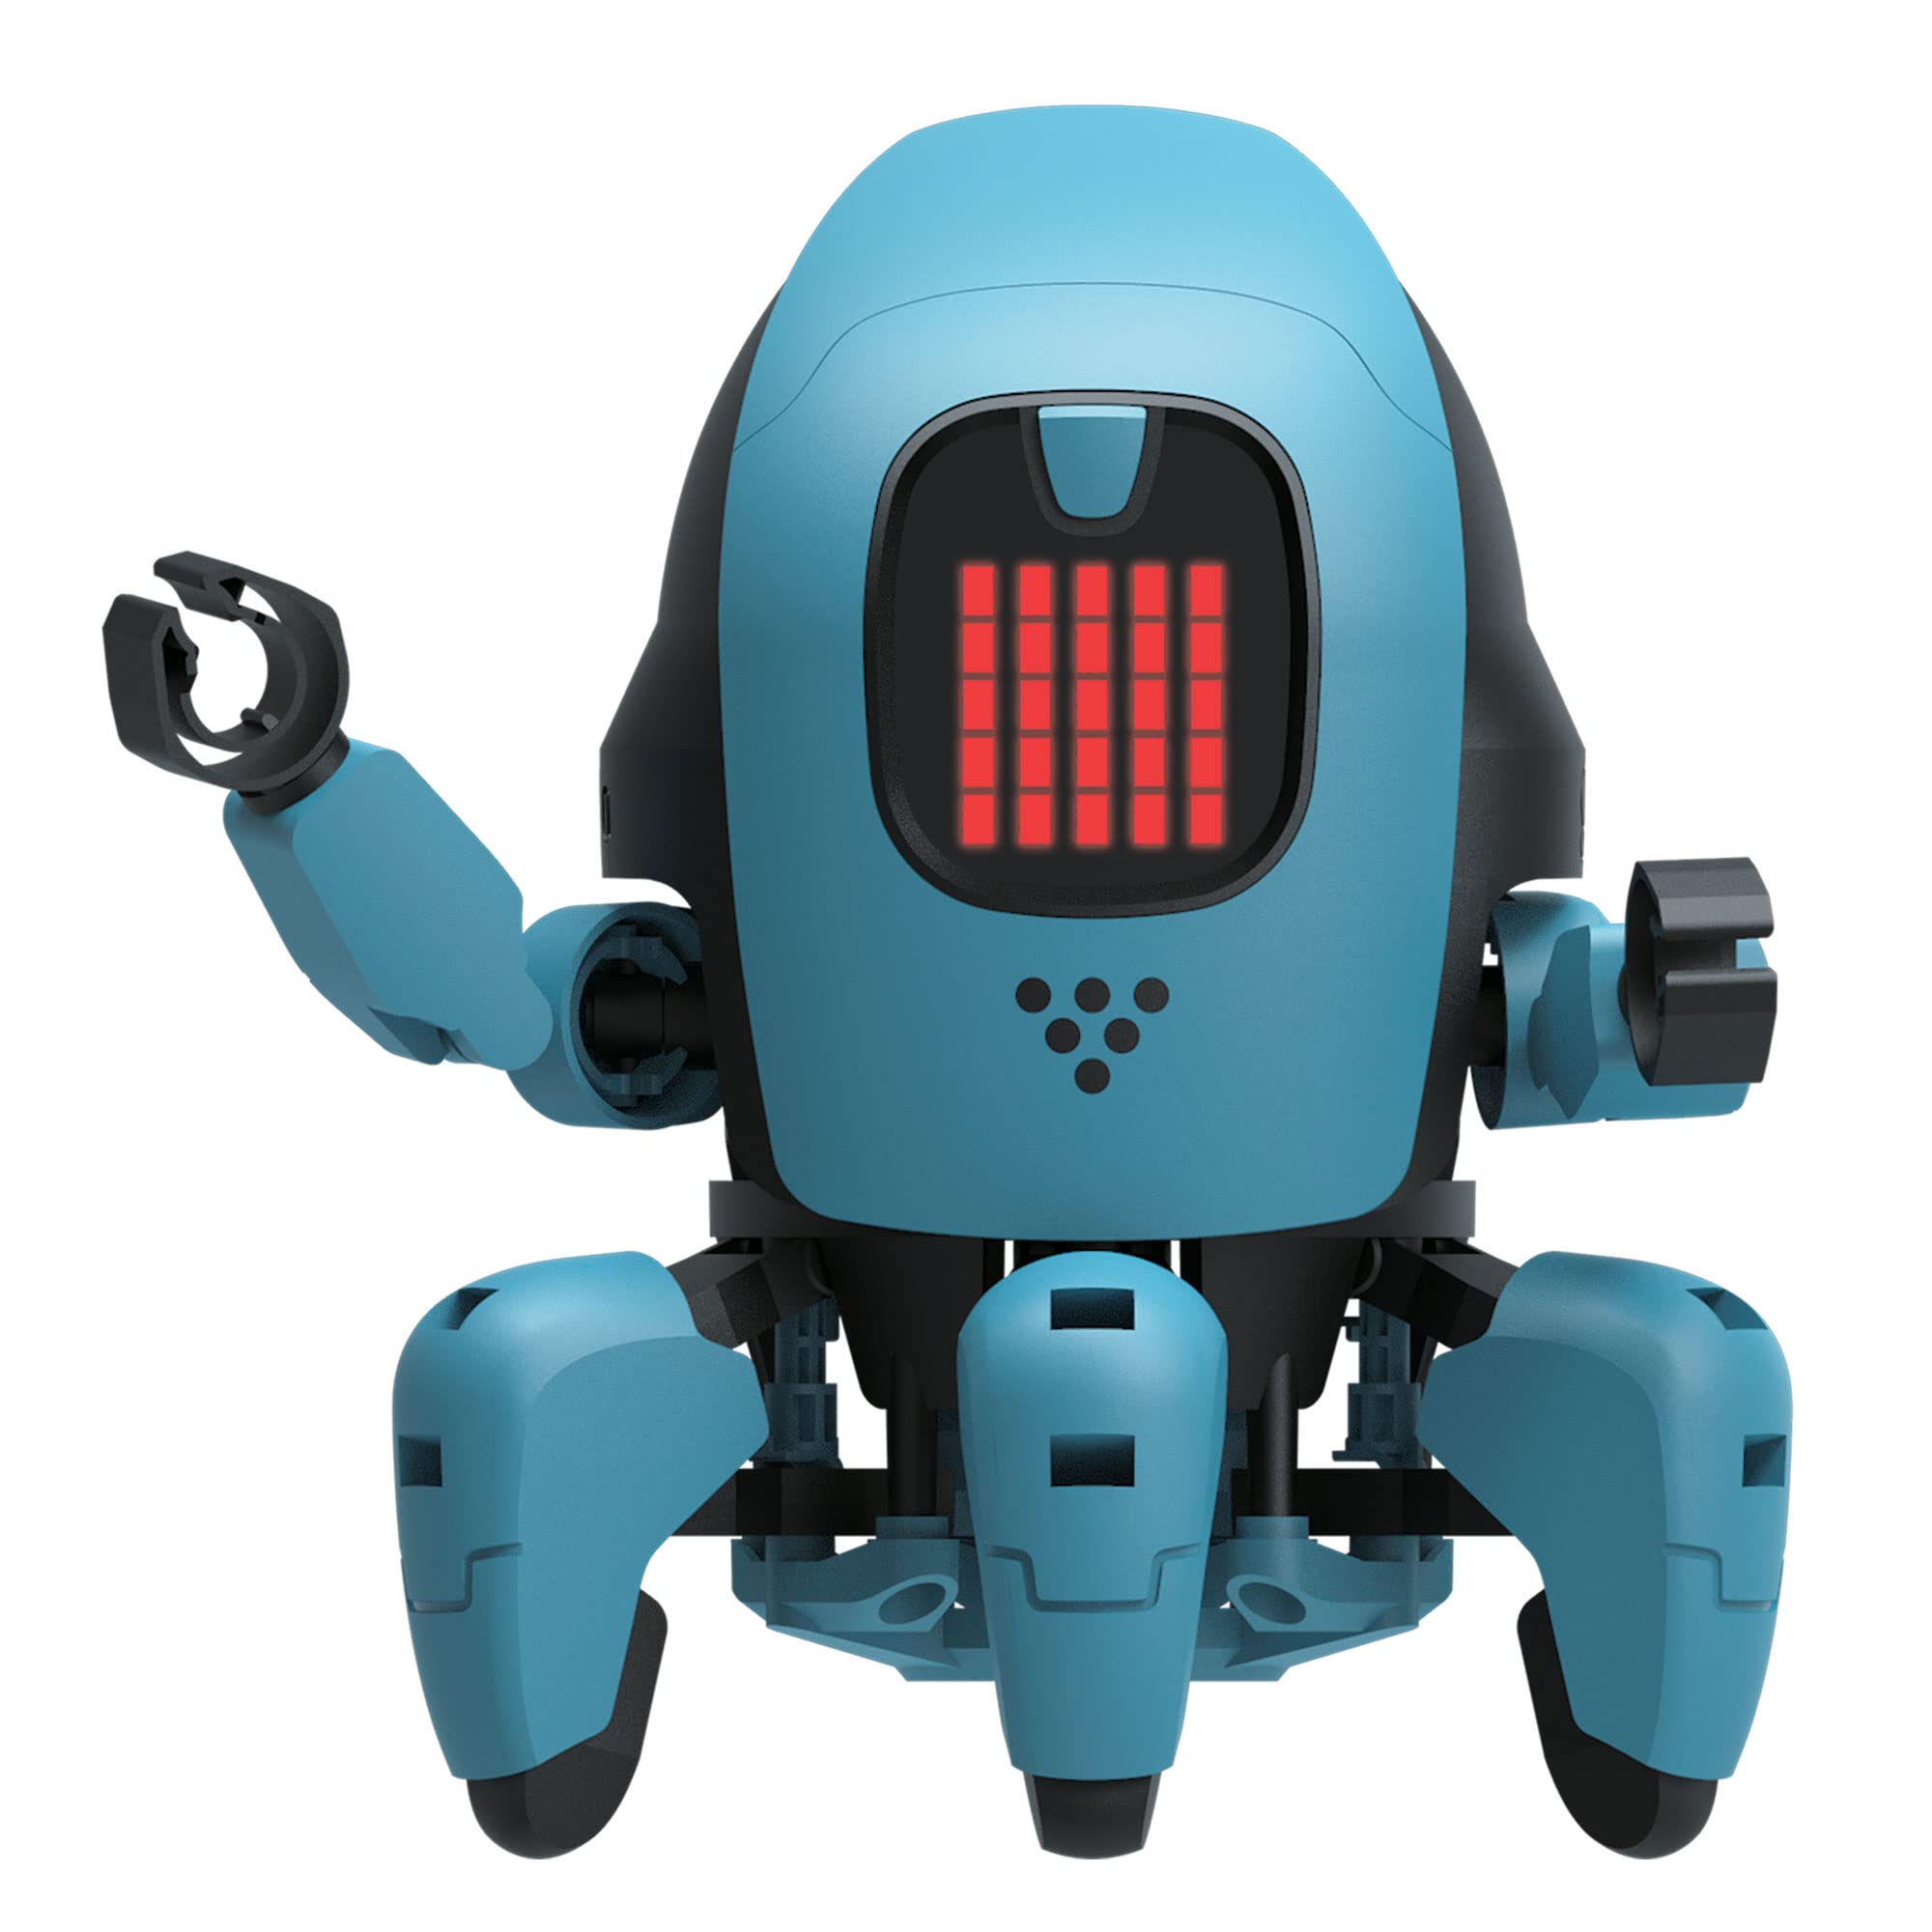 Thames & Kosmos Kai: The Artificial Intelligence Robot | Explore Machine Learning | Build an Innovative Smart Robot & Experiment with AI | App-Enabled for iOS & Android | Intro to AI for Kids